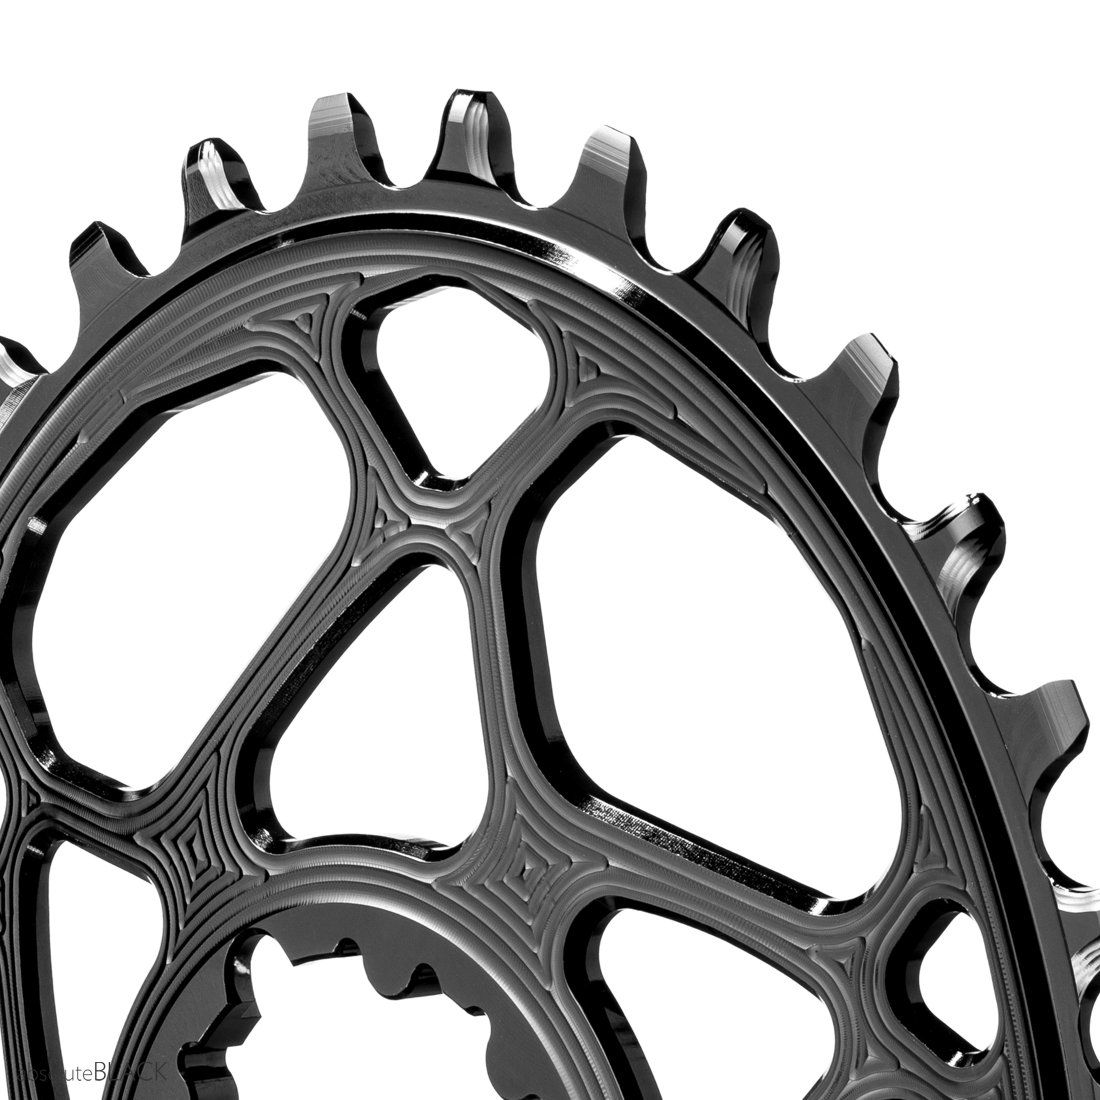 Oval Boost148 Traction chainring for SRAM with Shimano Hyperglide+ 12spd chain